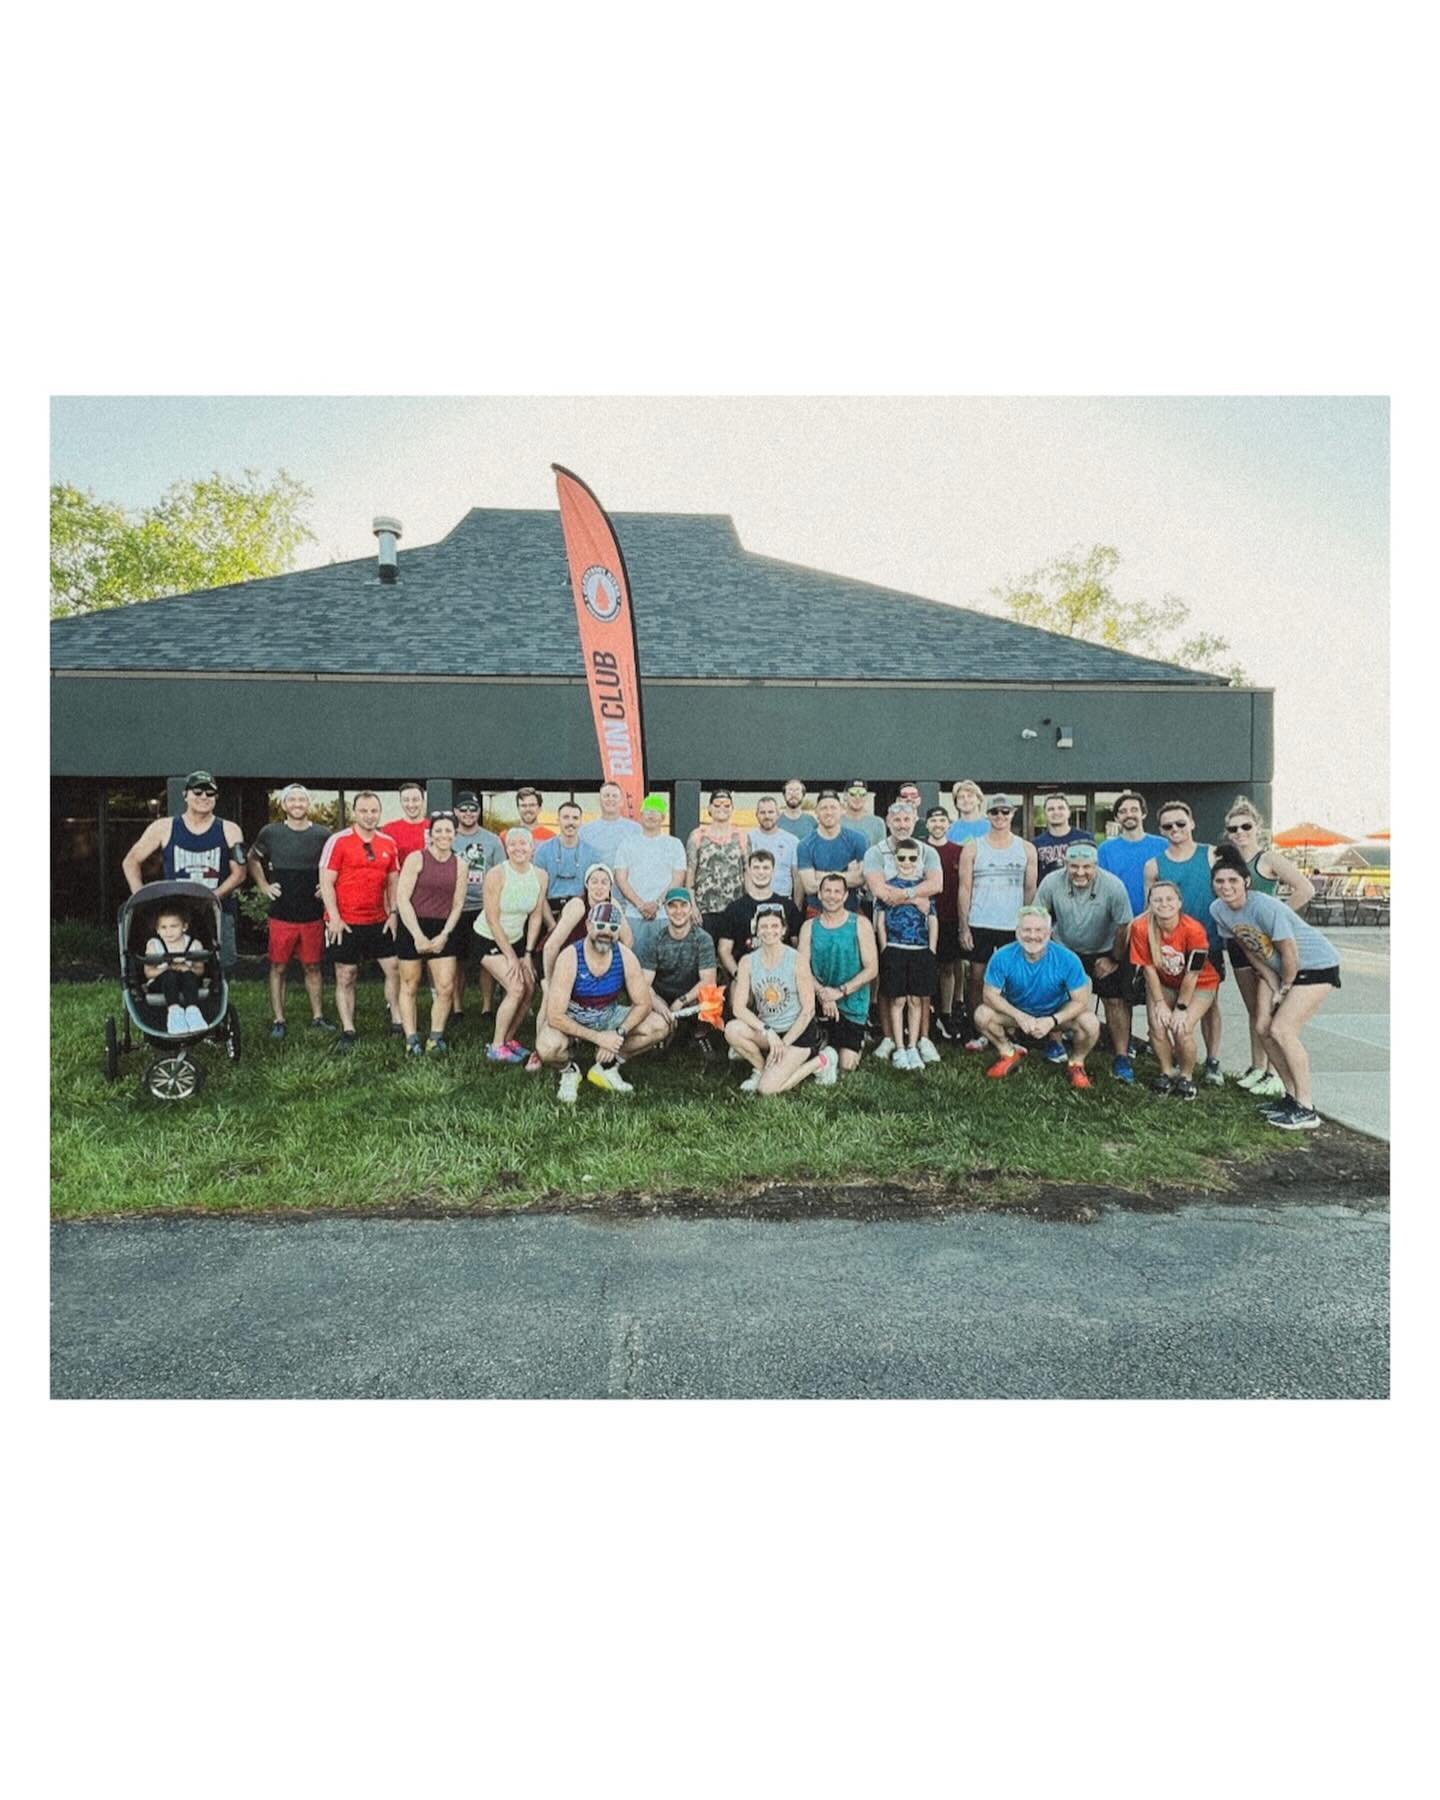 5 years of Run Club!

Last night, these folks celebrated the 5th Anniversary of ORBC&rsquo;s Run Club. 
Every Tuesday evening, these guys and gals gather together to run, enjoy some ORBC drinks, and ultimately, build friendships and enjoy community. 